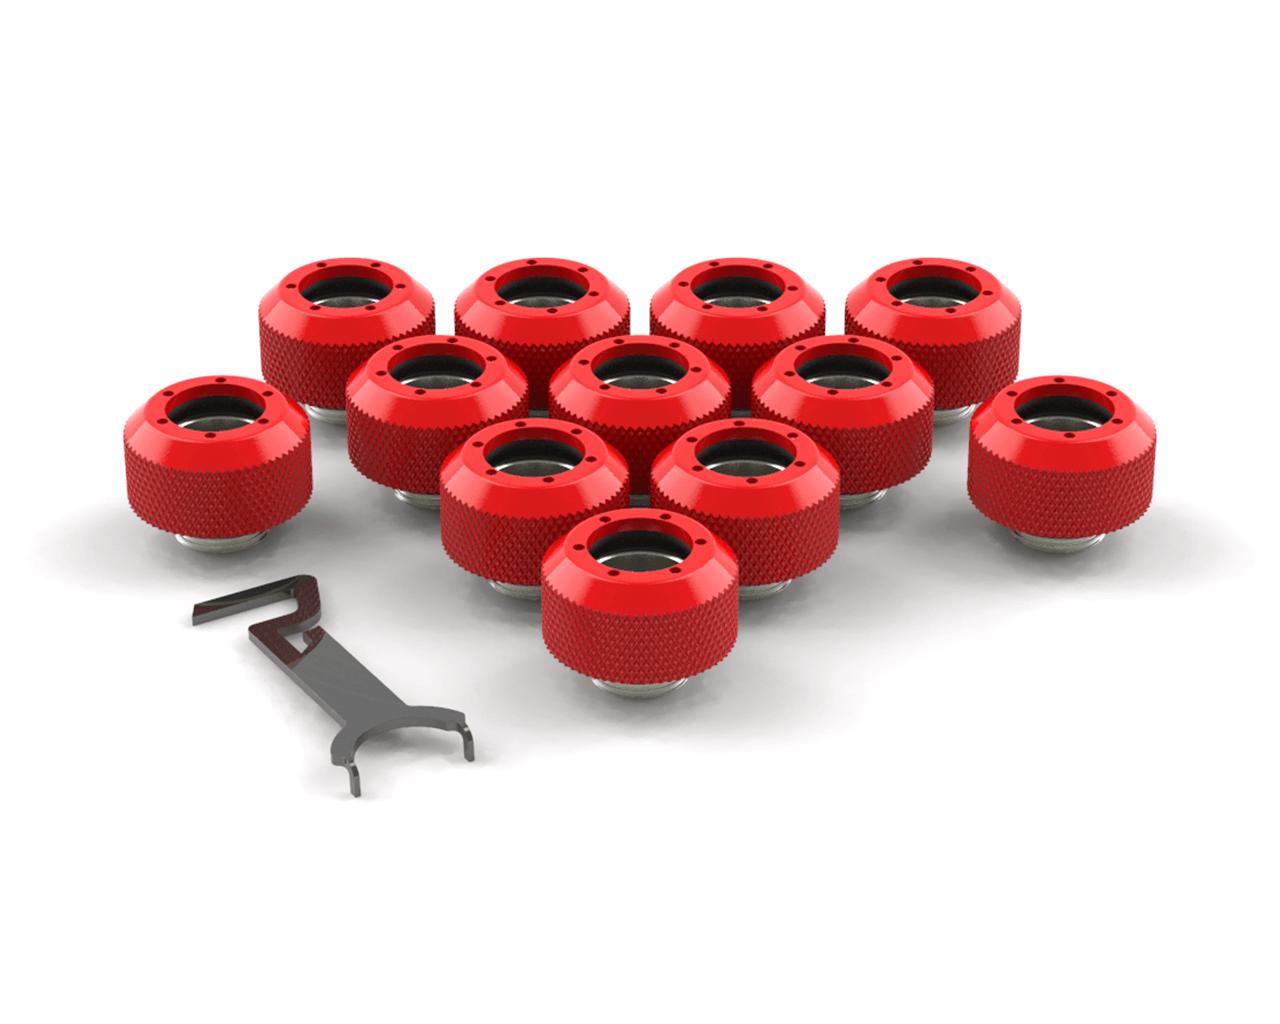 PrimoChill 1/2in. Rigid RevolverSX Series Fitting - 12 pack - PrimoChill - KEEPING IT COOL Comp Red